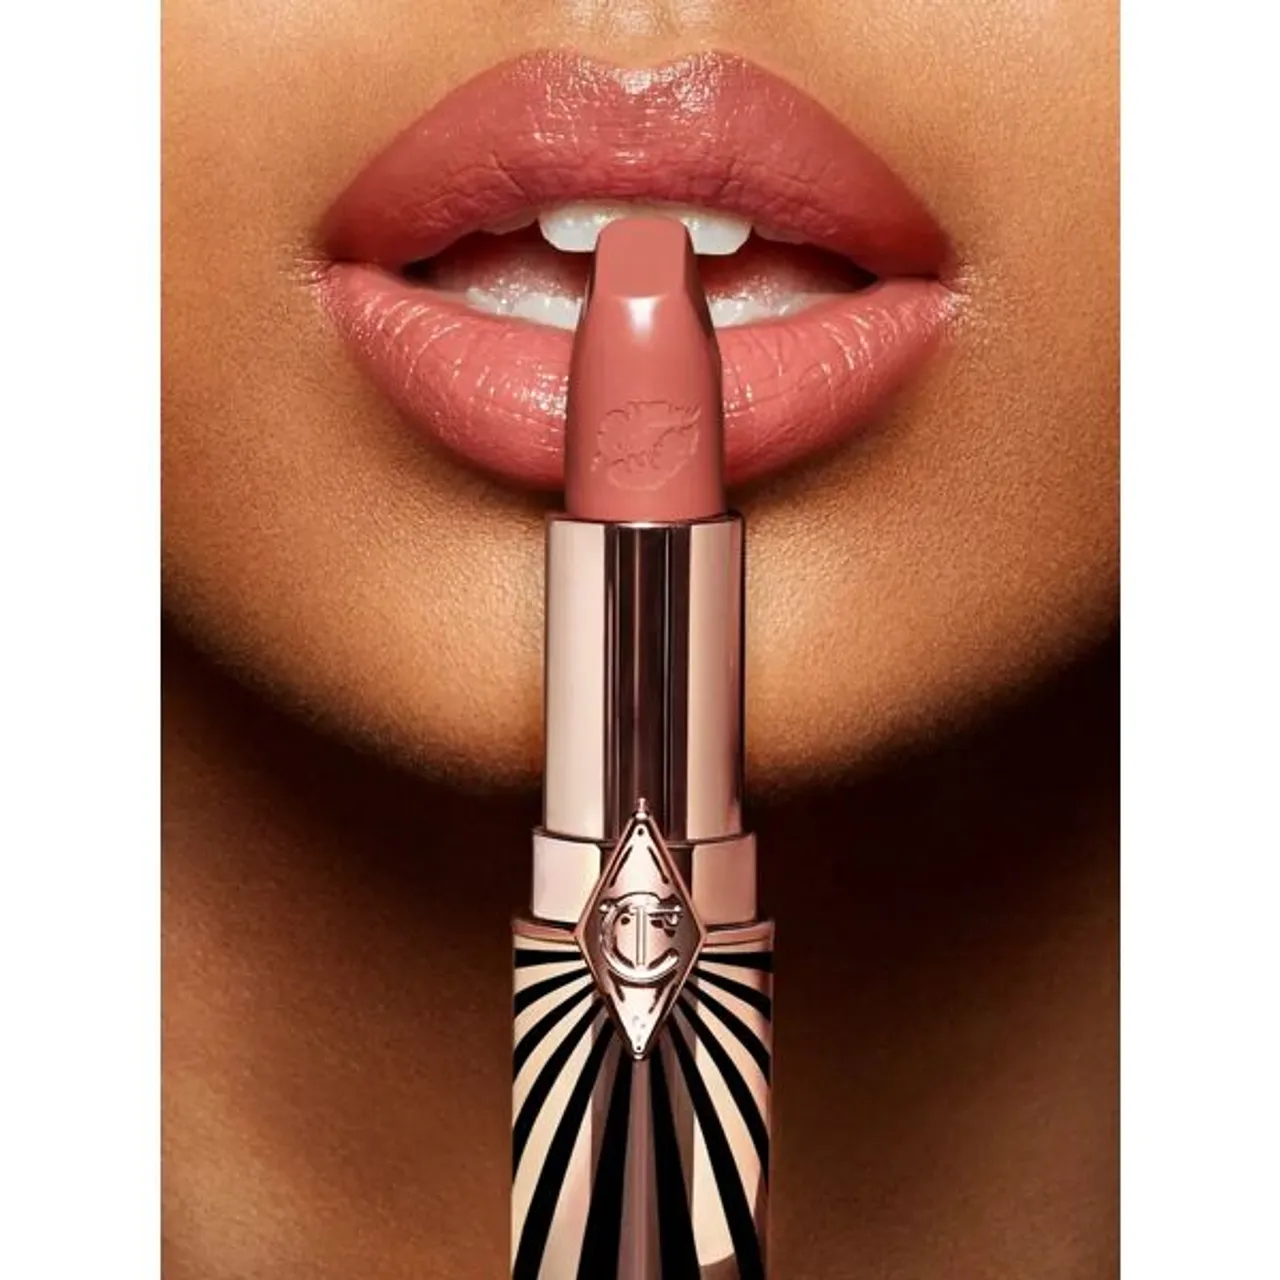 Charlotte Tilbury Hot Lips 2.0 - In Love With Olivia - Unisex